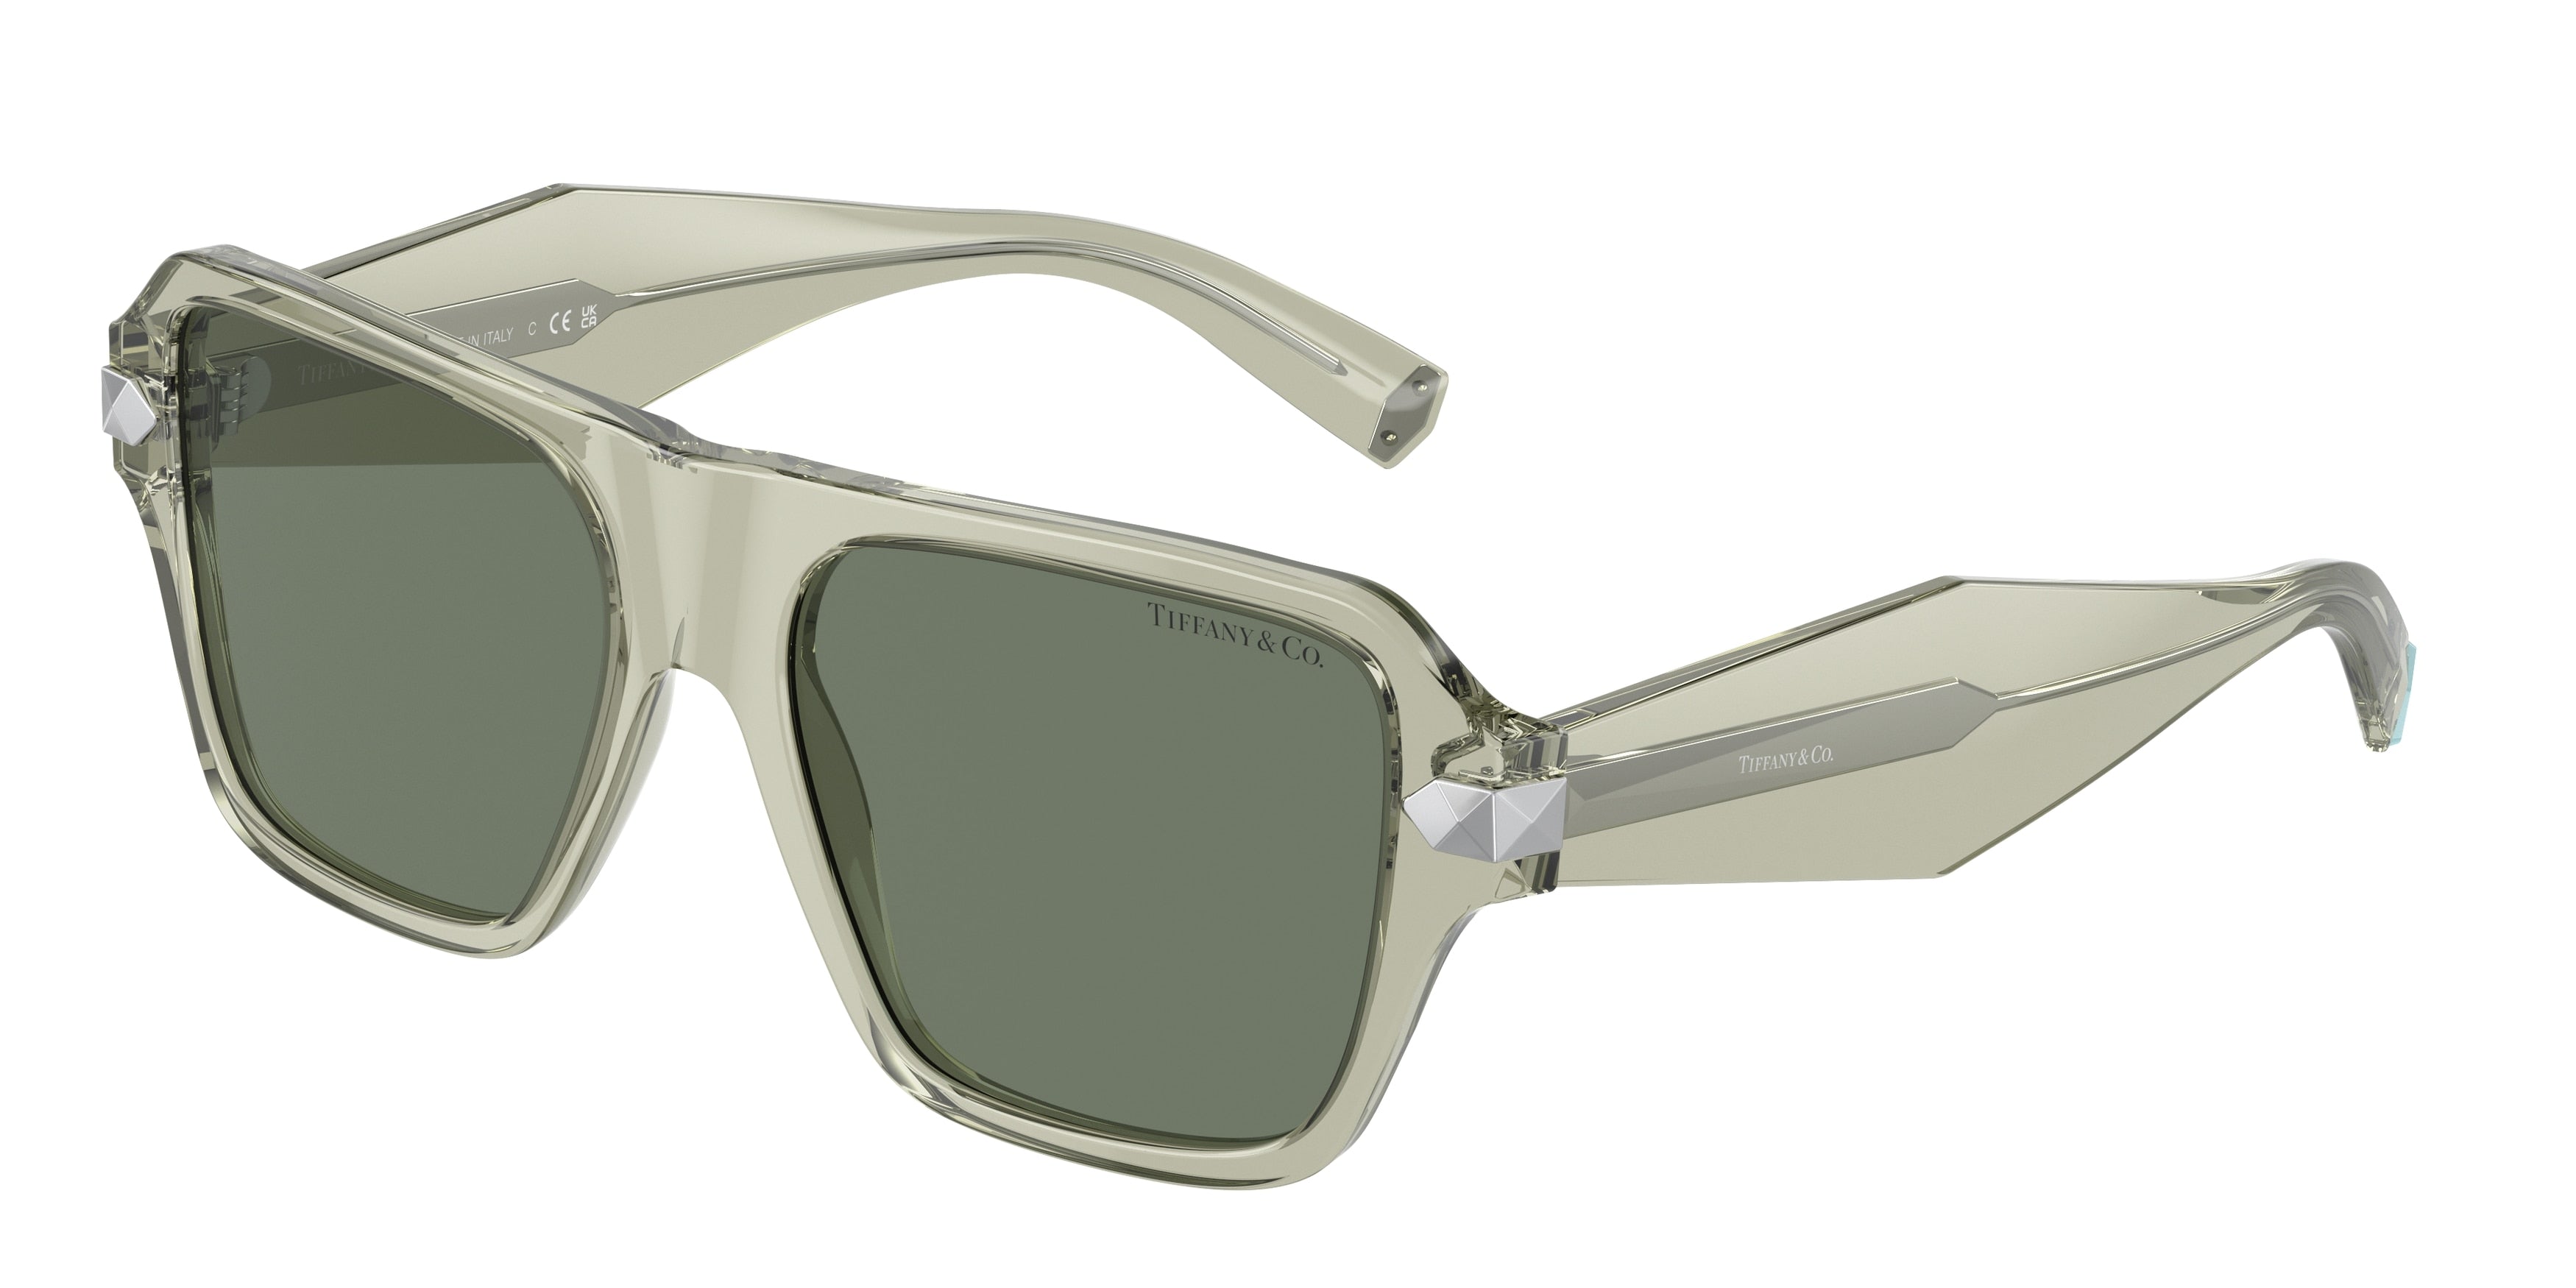 Tiffany TF4204 Square Sunglasses  83783H-Crystal Green 54-140-17 - Color Map Green